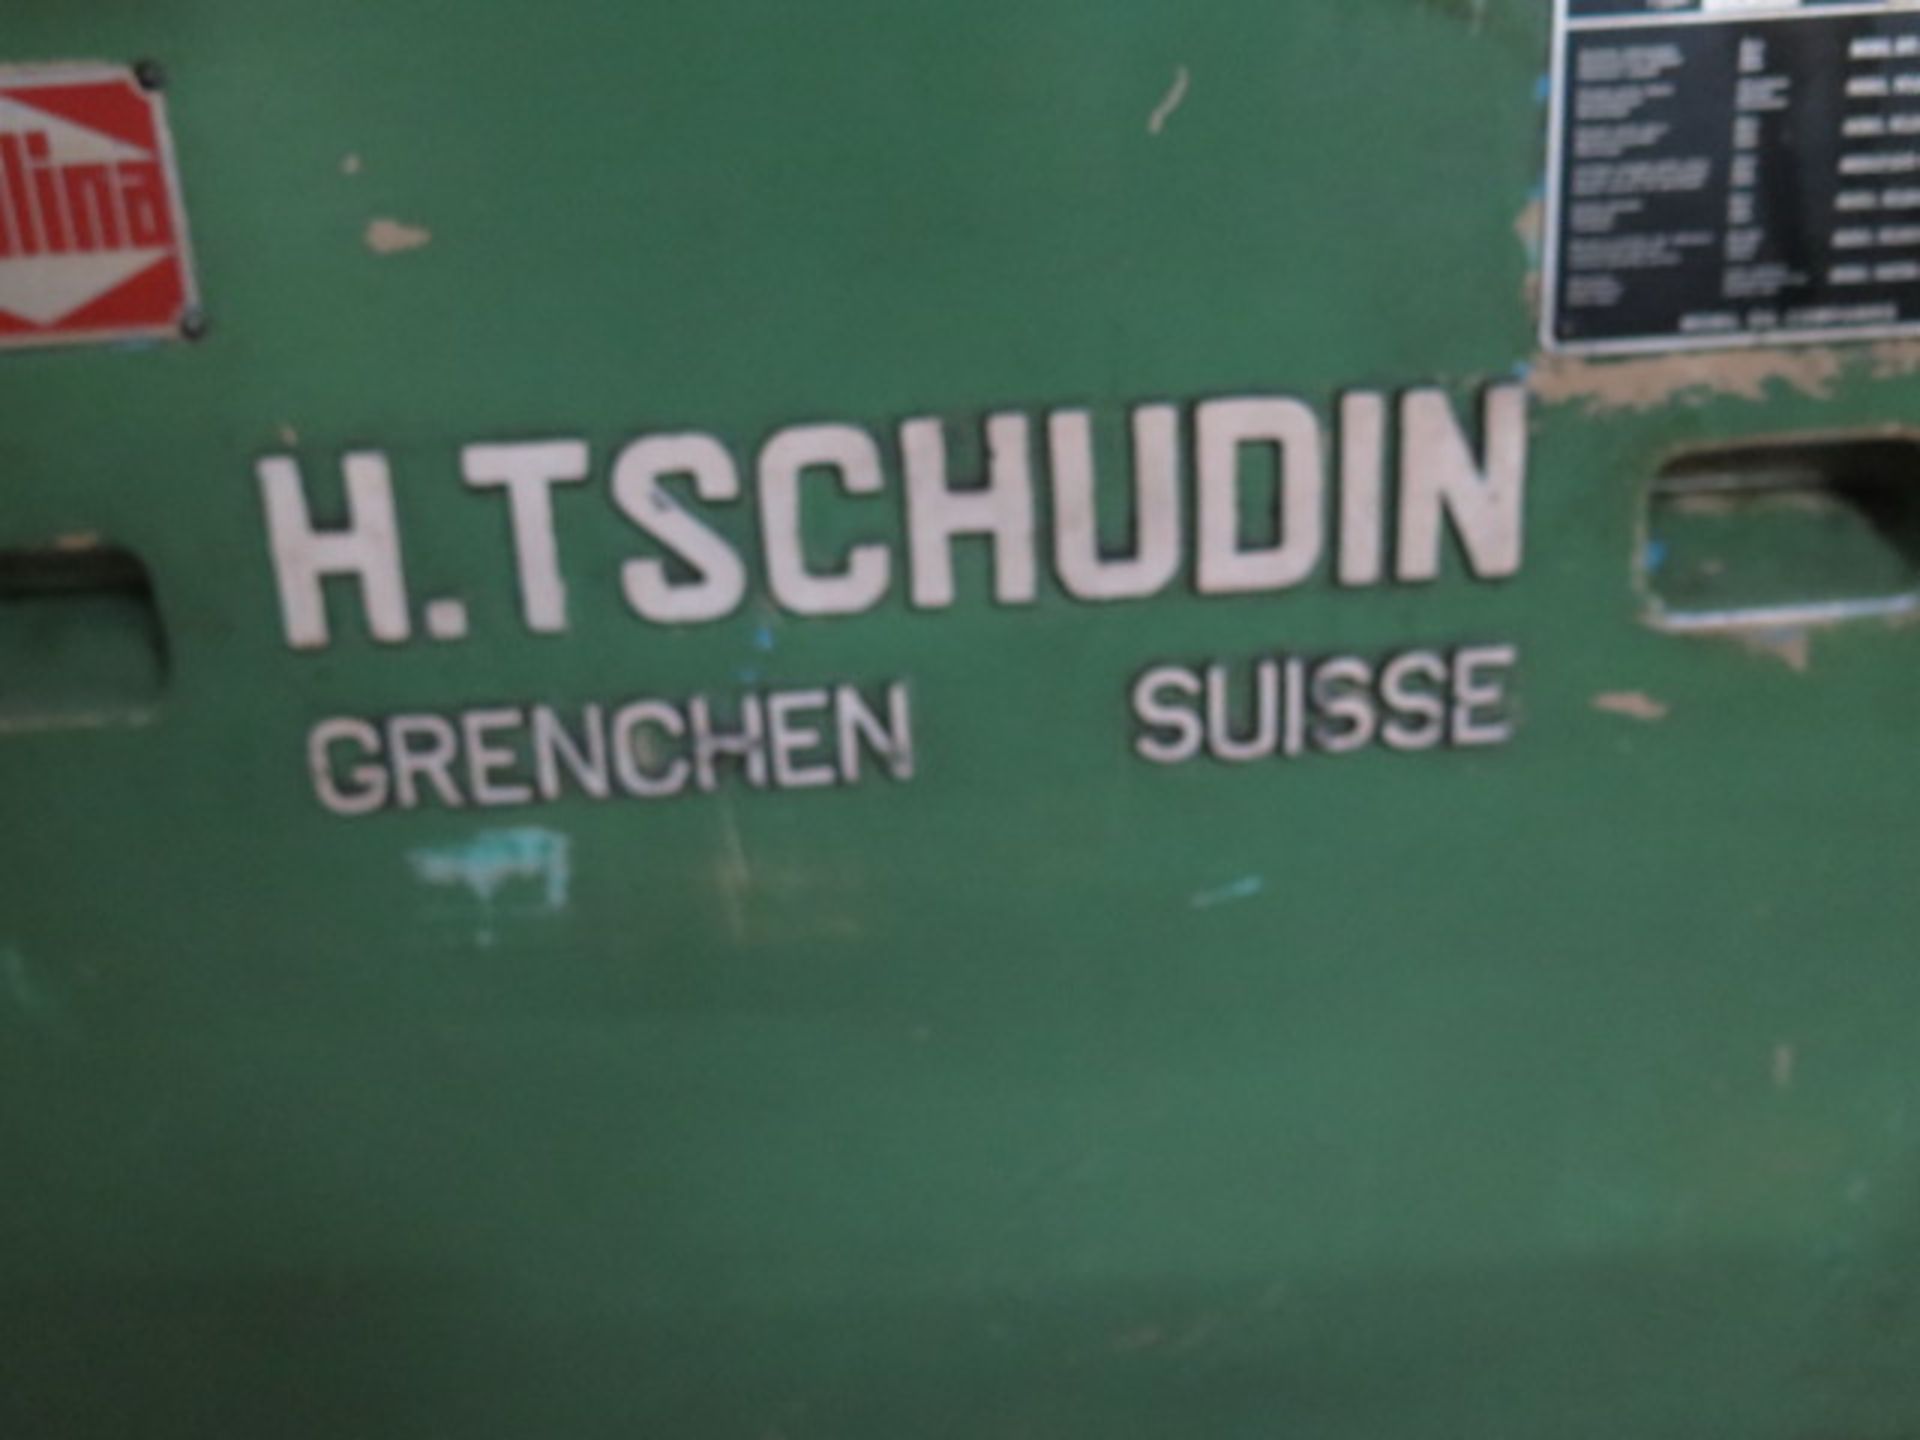 H. Tschudin HTG-600 Cylindrical Grinder s/n 68276 w/ Motorized Work Head, Tailstock, SOLD AS IS - Image 16 of 17